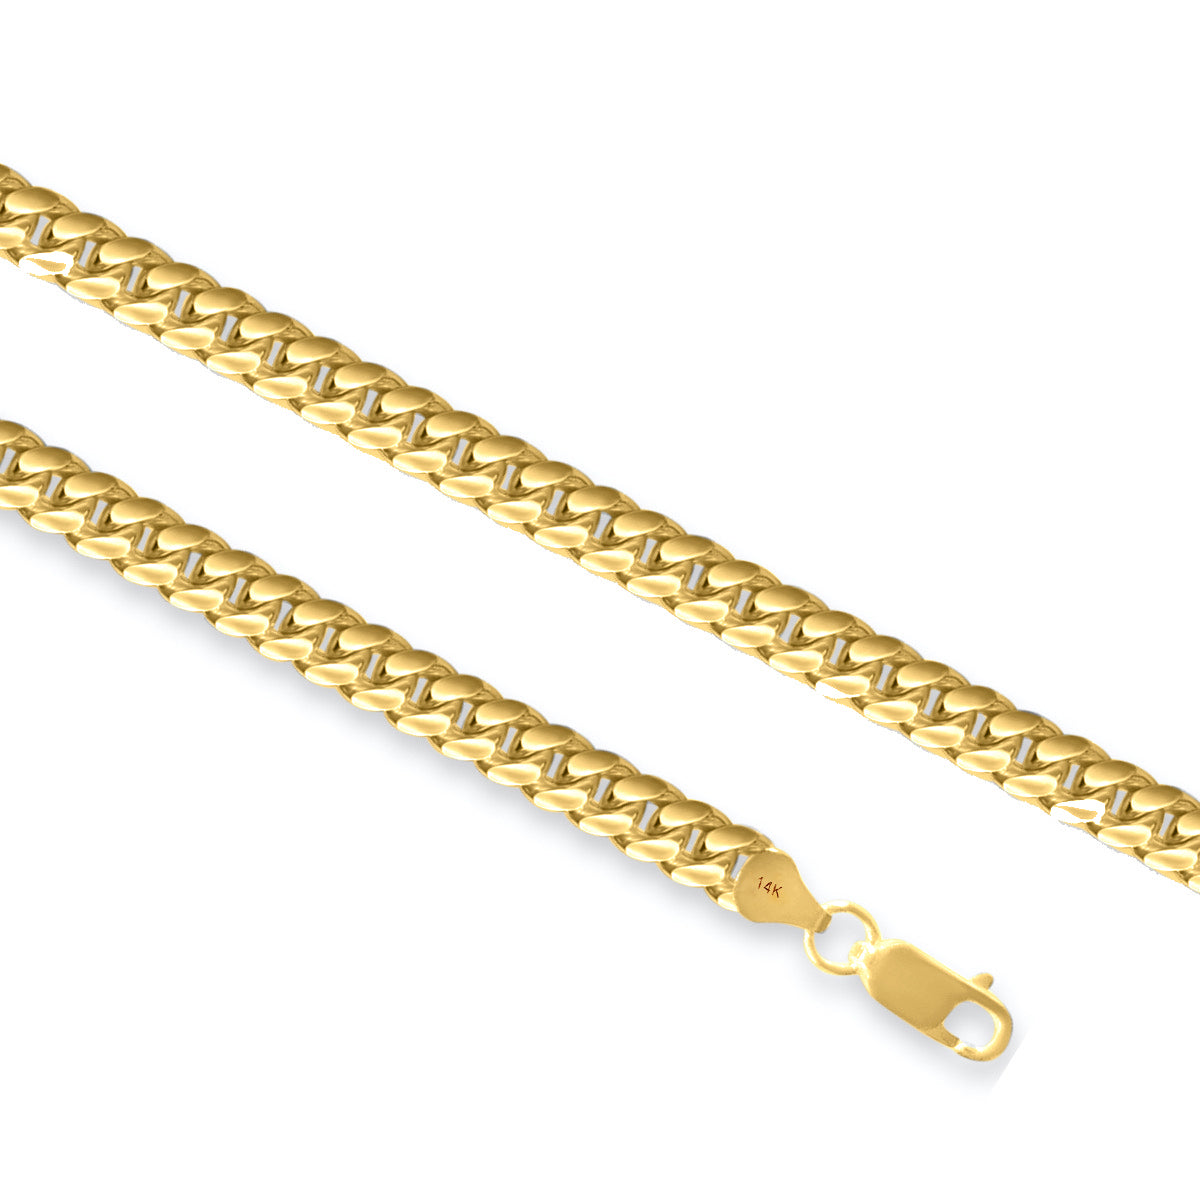 Men’s 6.5mm Miami Cuban Link Chain Necklace 20” in 14k Gold